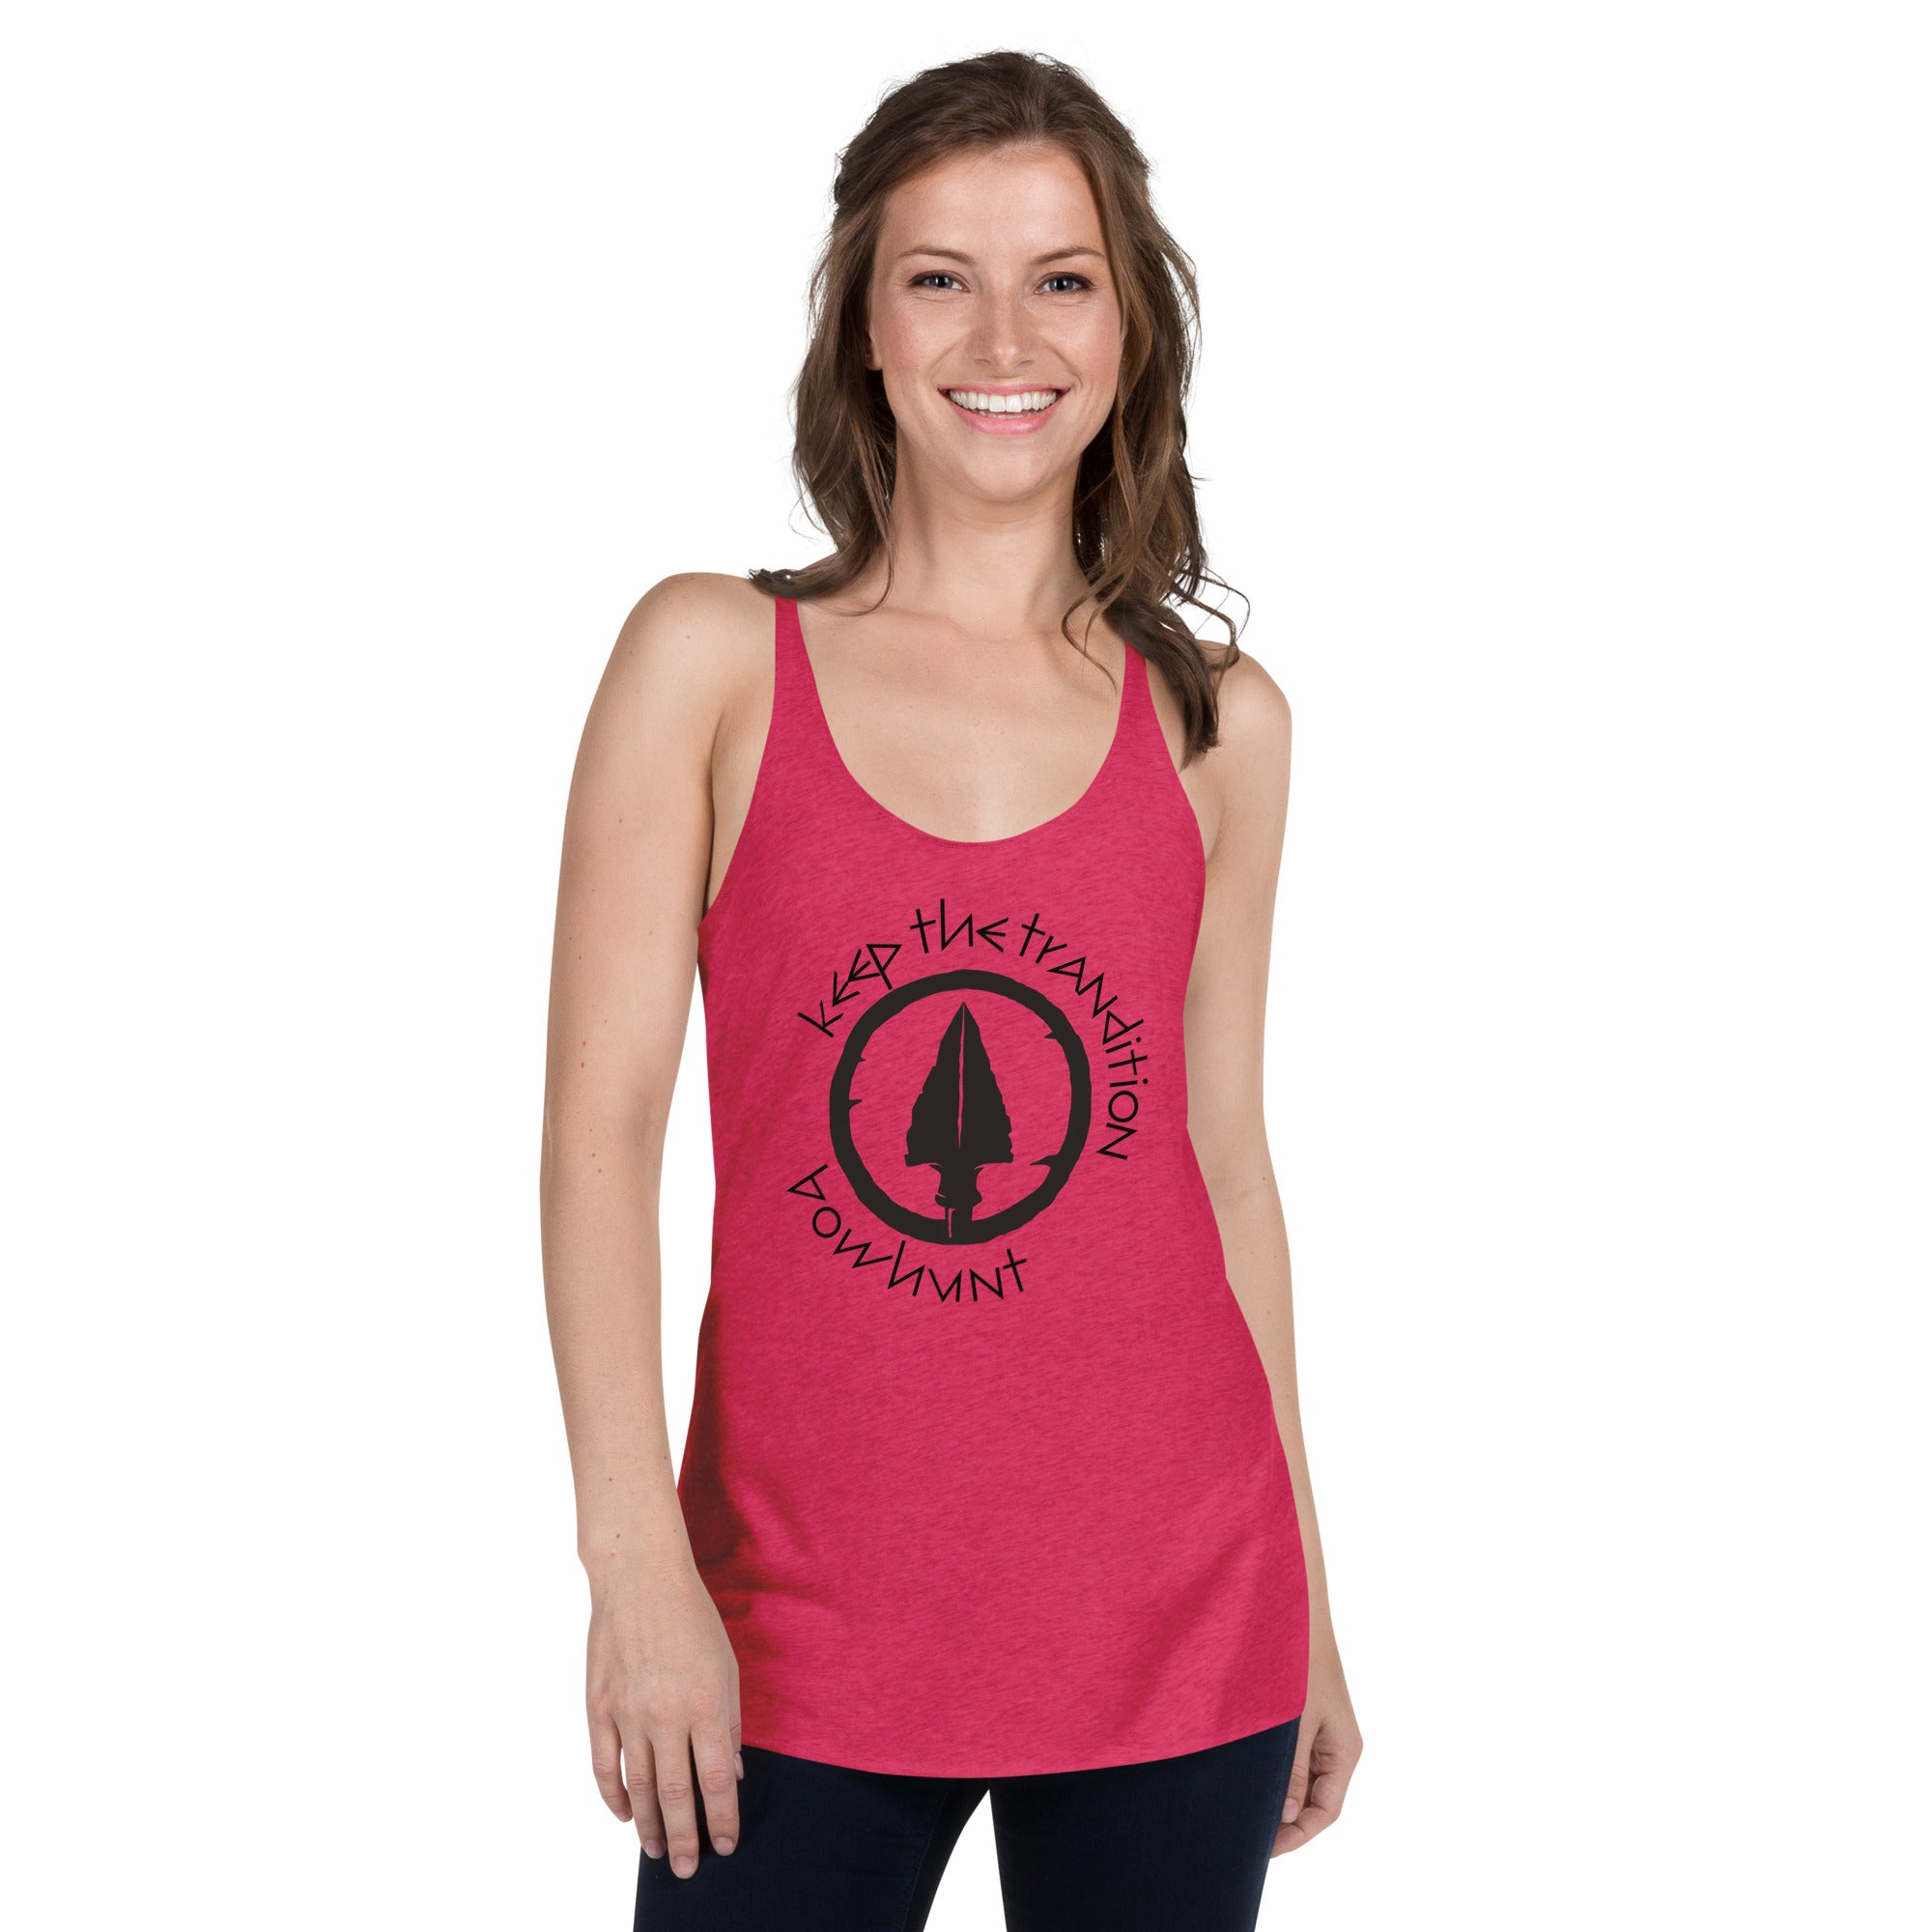 Keep The Tradition Women's Racerback Tank - Bow Hunt